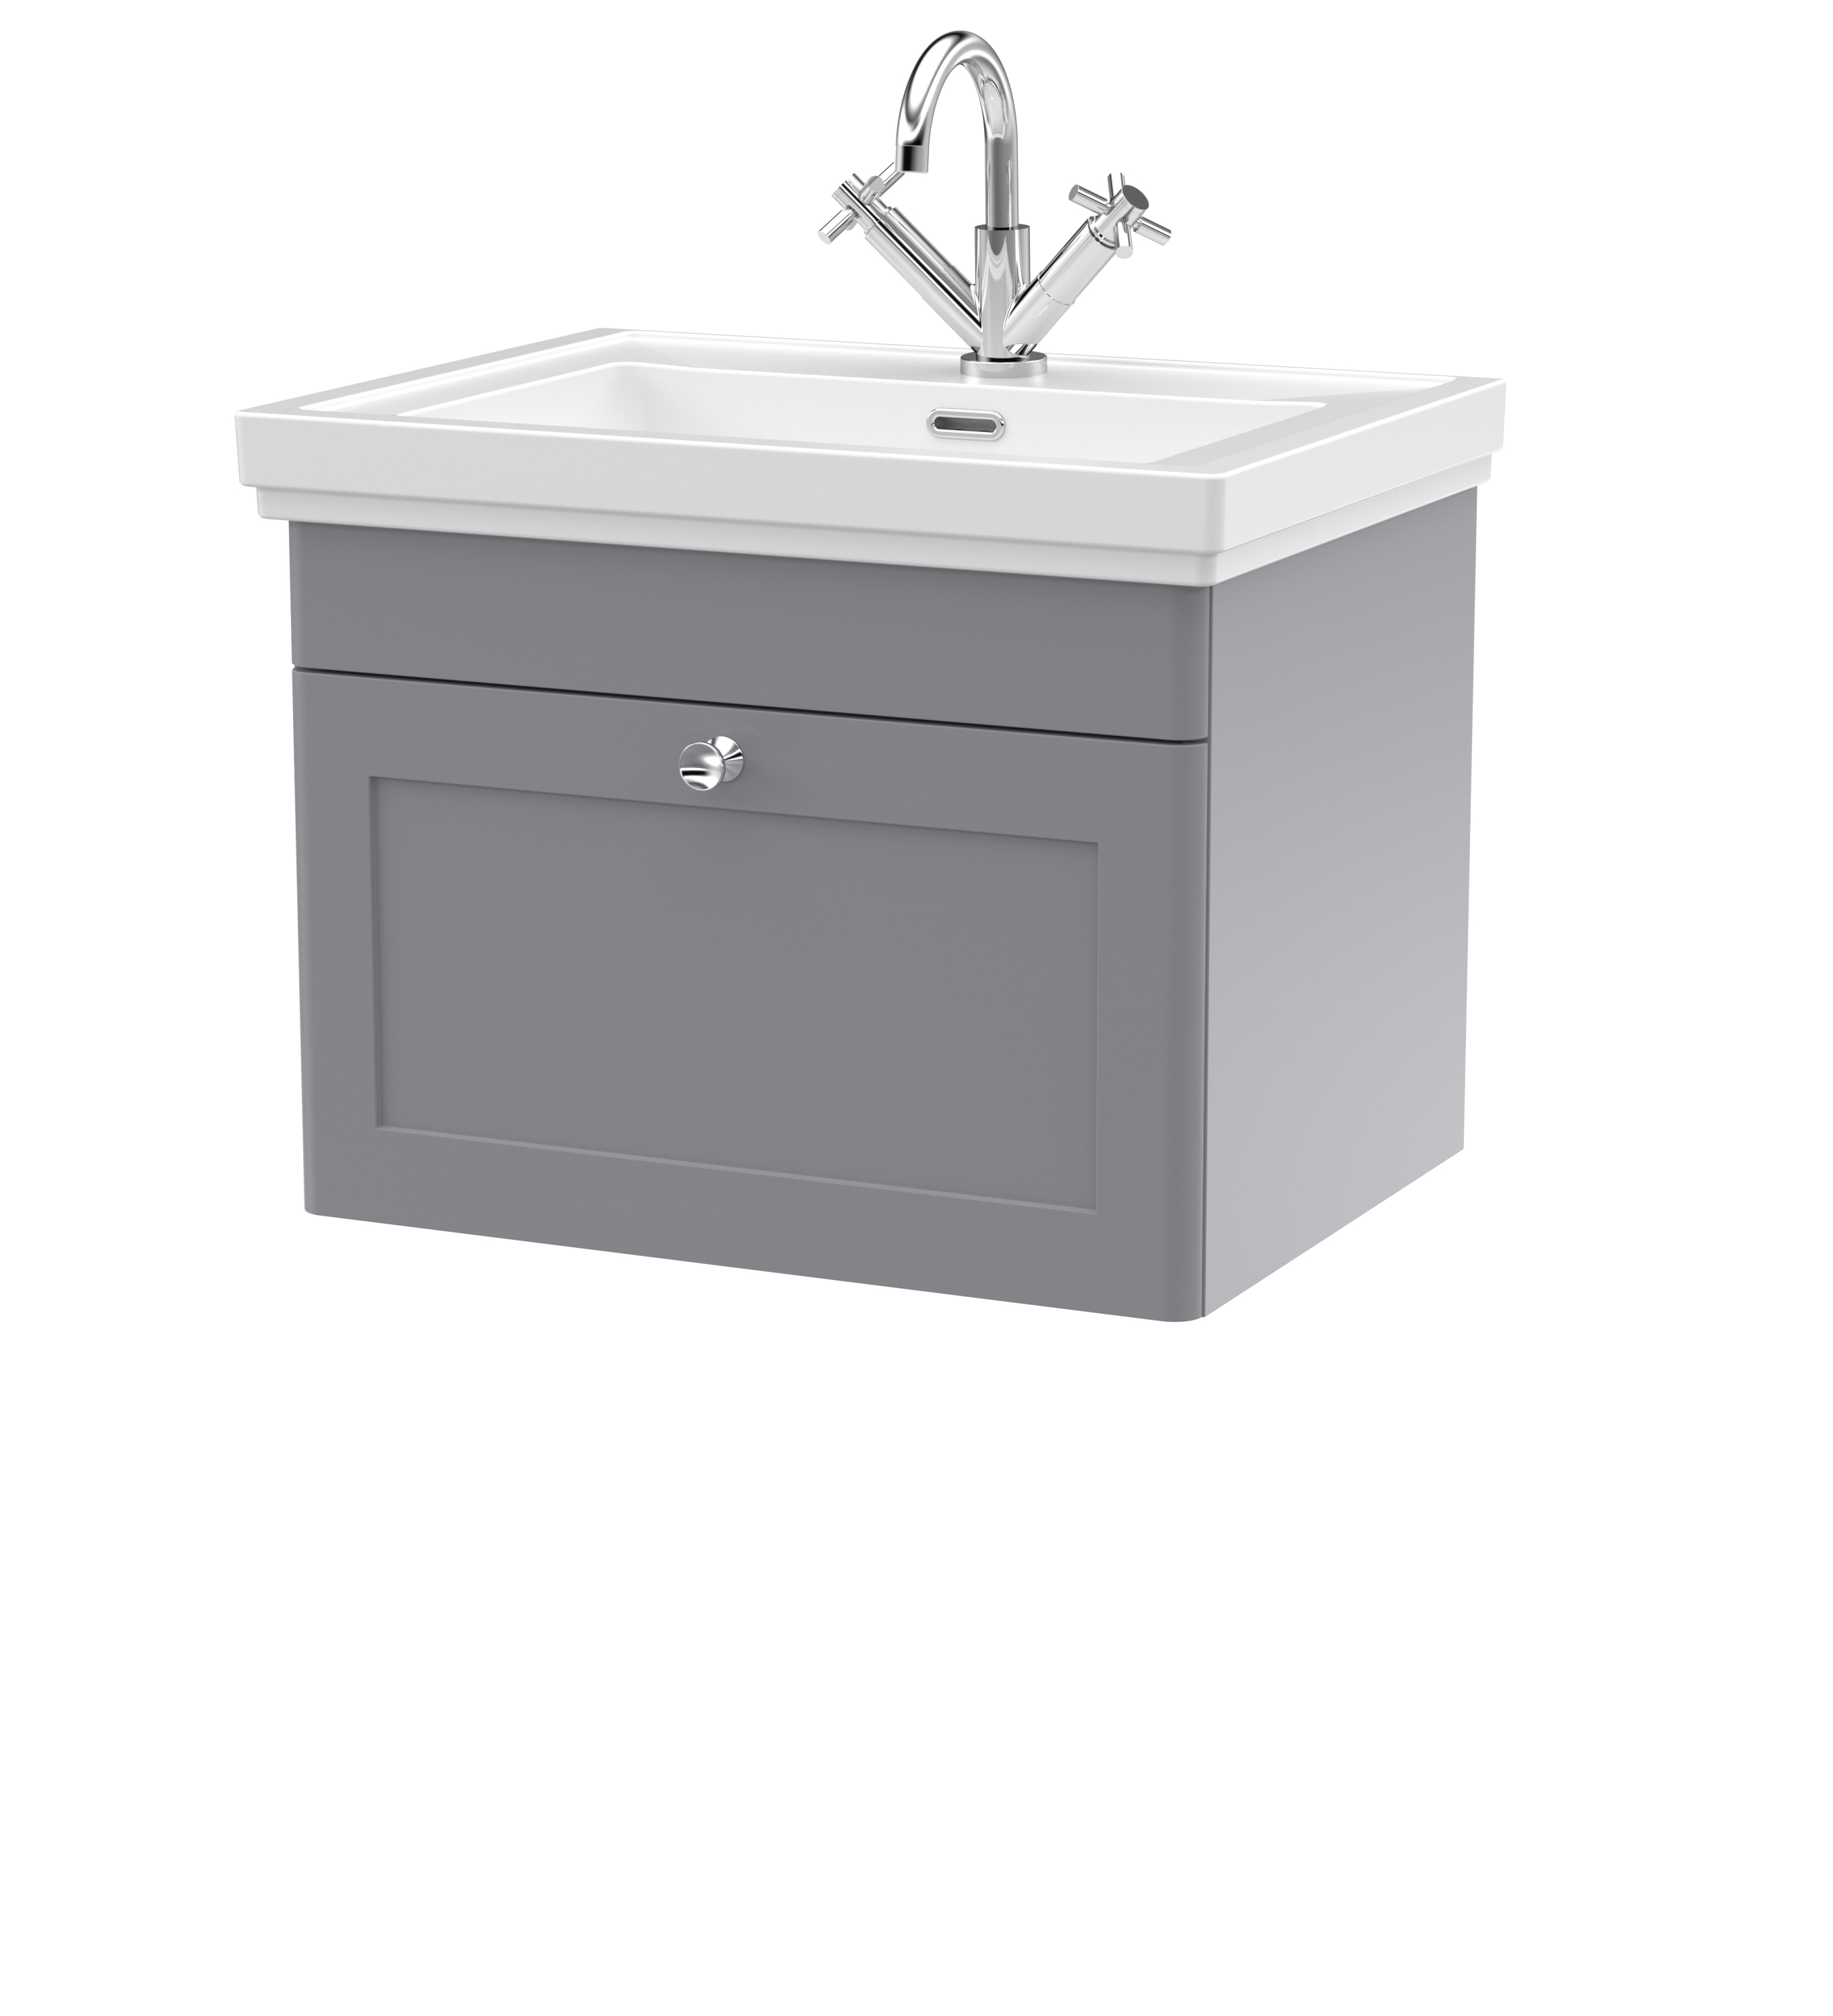 Nuie Classique 600mm Traditional Wall Mounted Vanity Unit & Basin - Satin Grey